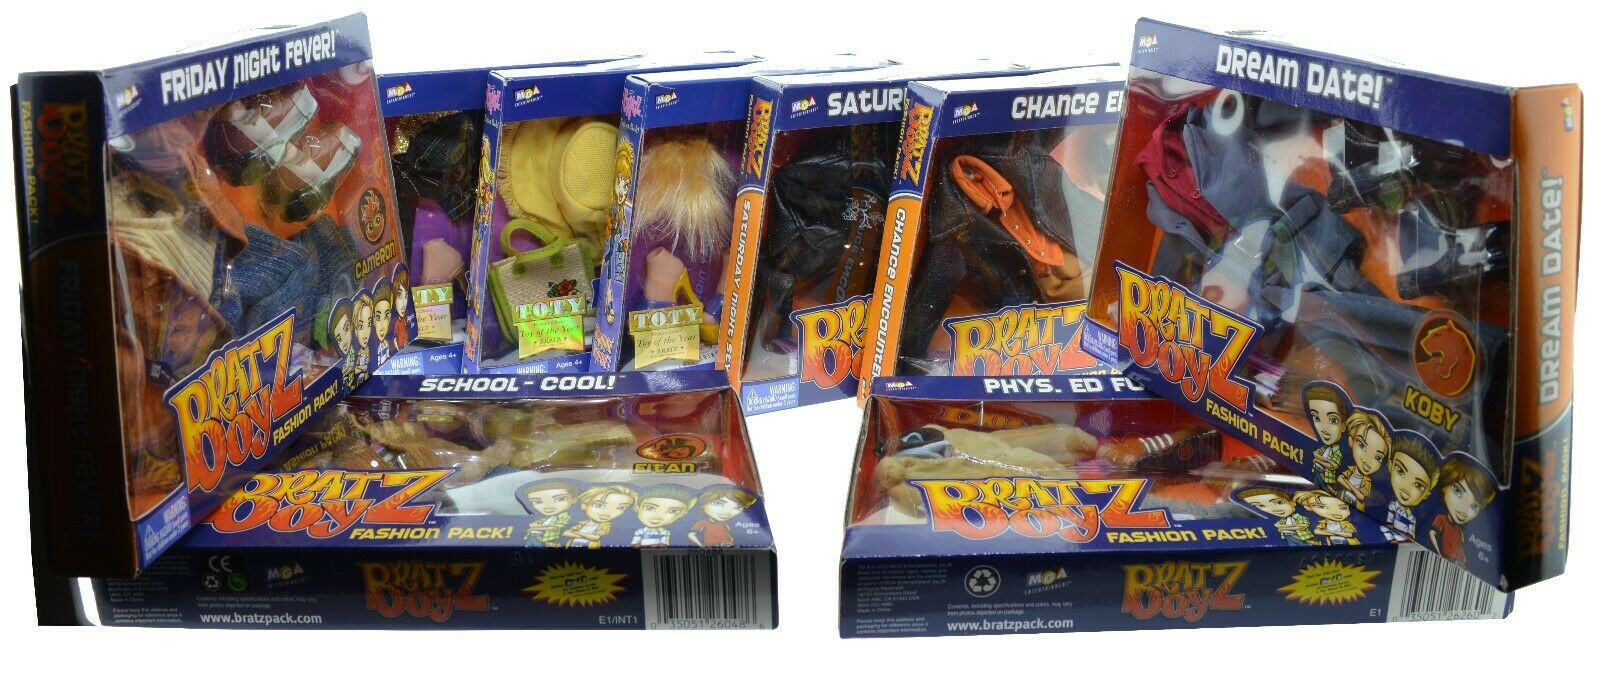 9 Pack Bratz Fashion Pack You Get 9 Different One 3 Girls 6 Boys New In Box